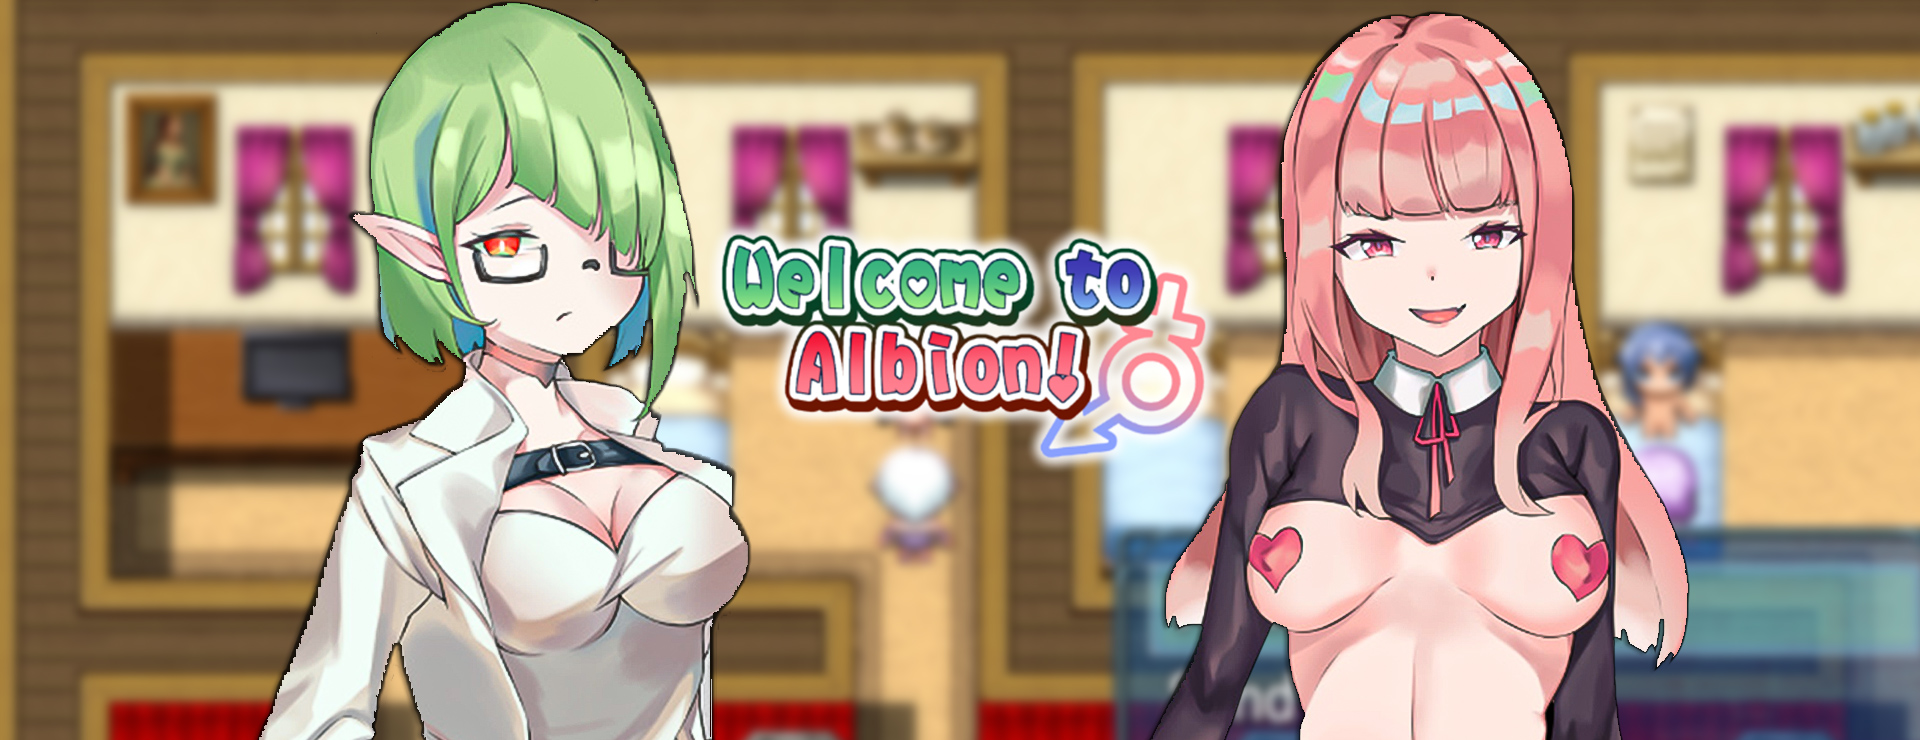 Welcome to Albion! - 角色扮演 遊戲